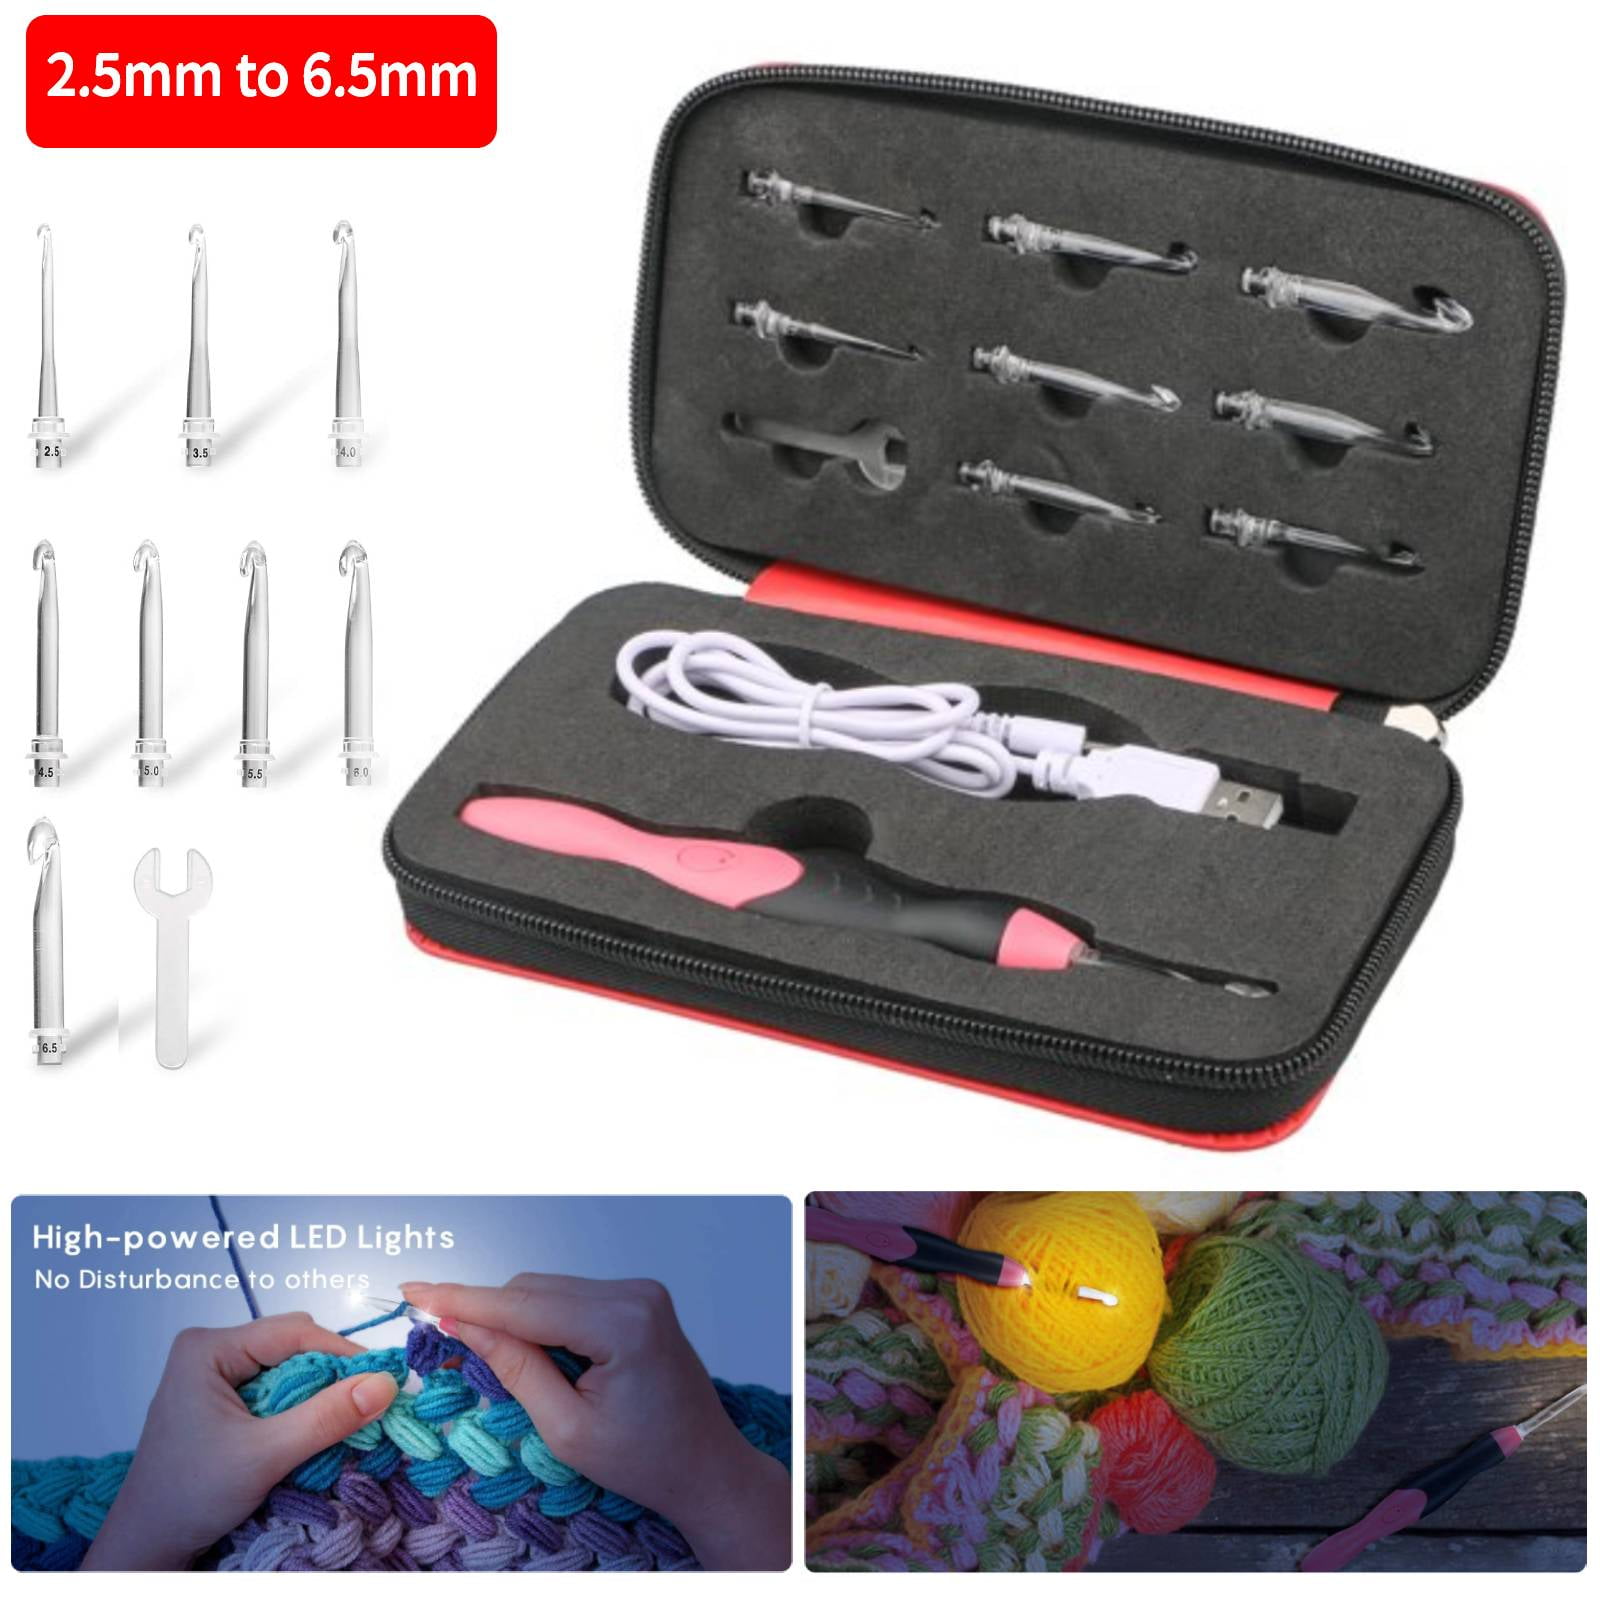 9 in 1 USB Rechargeable LED Light Up Weave Crochet Hook Set Kit With 9 Heads